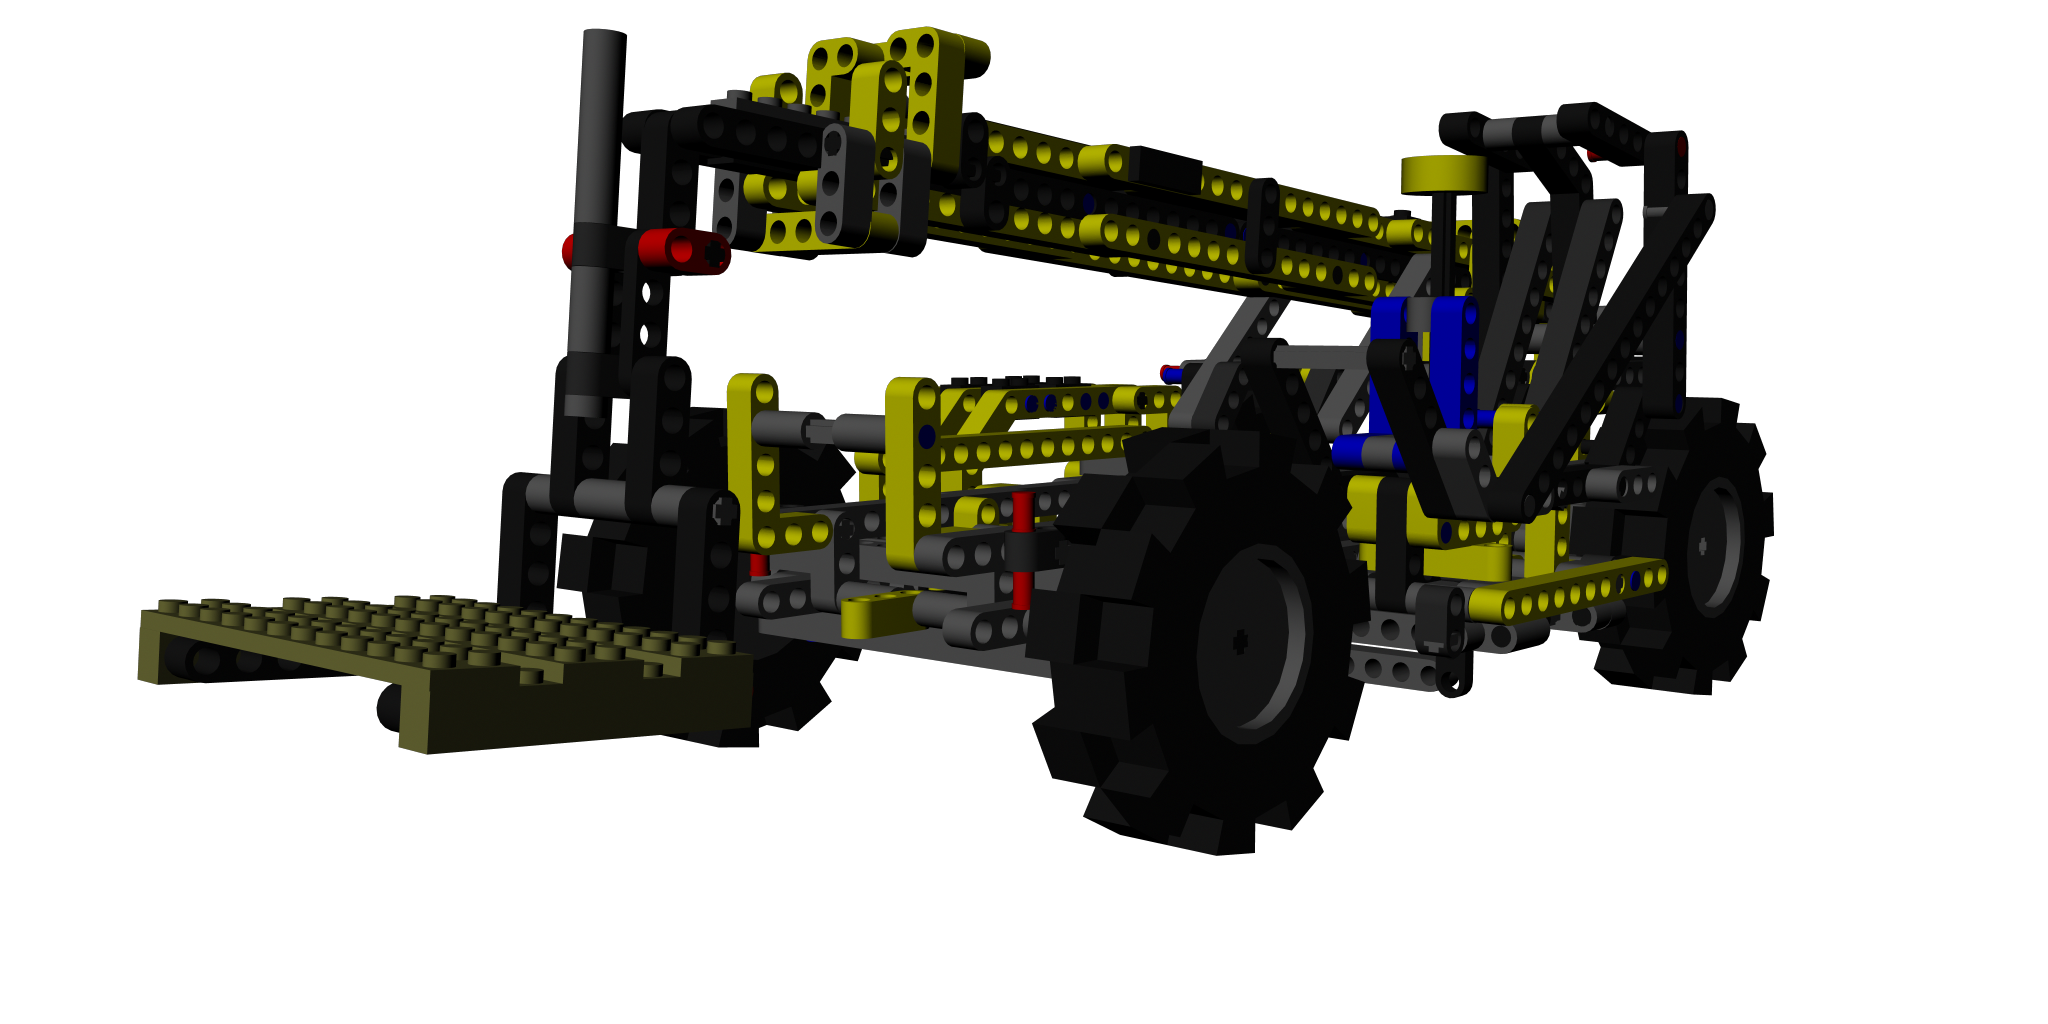  Lego model created using a custom-made script to generate the required pieces. Done in Maya 2014 